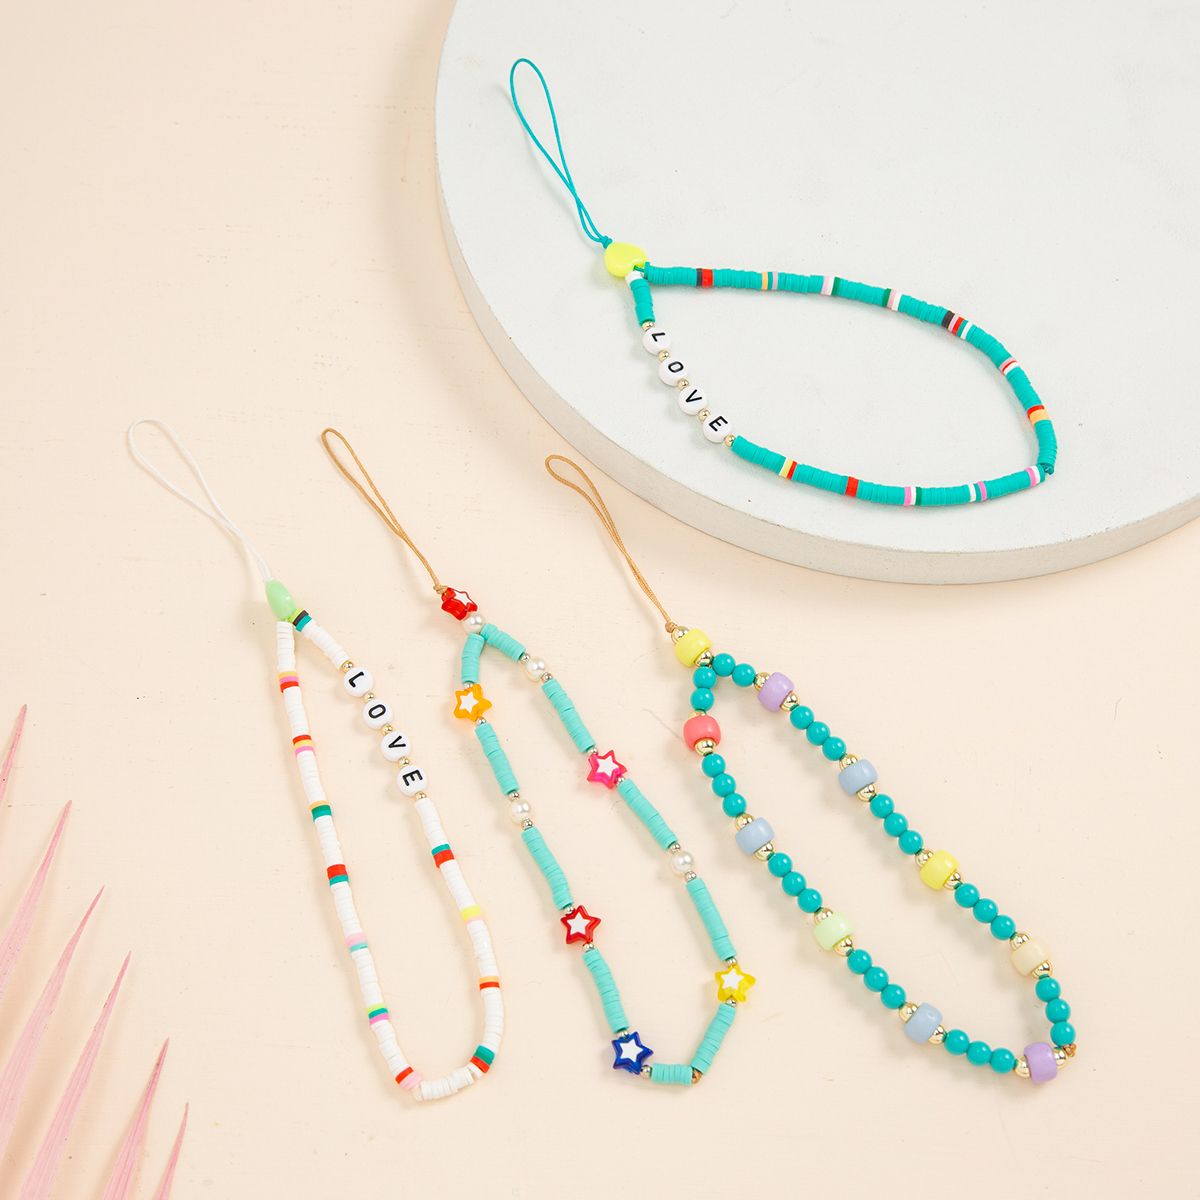 PUPU Fashion Colorful Acrylic Bead Anti-Lost Phone Chain Soft Pottery Rope Cell Phone Case Hanging Cord Mobile Phone Strap Lanyard